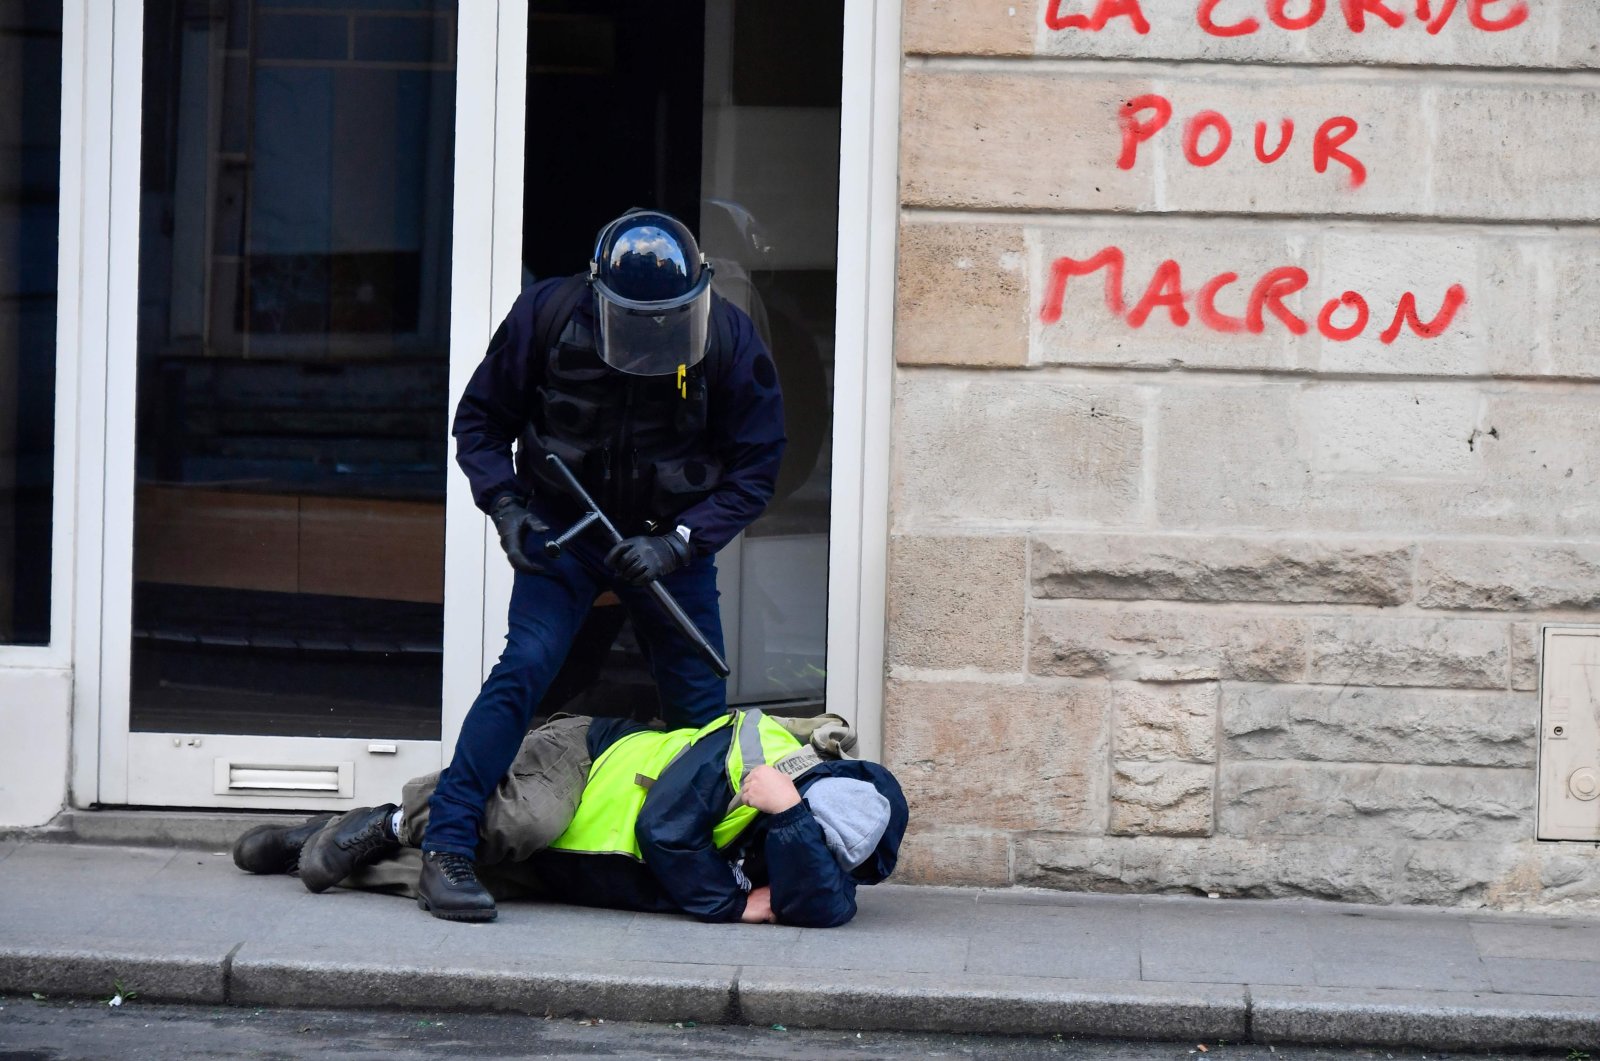 A riot policeman stands over a protestor wearing a yellow vest during clashes with protesters in a demonstration called by the "Yellow Vests" movement in Bordeaux, Feb. 2, 2019. (AFP Photo)